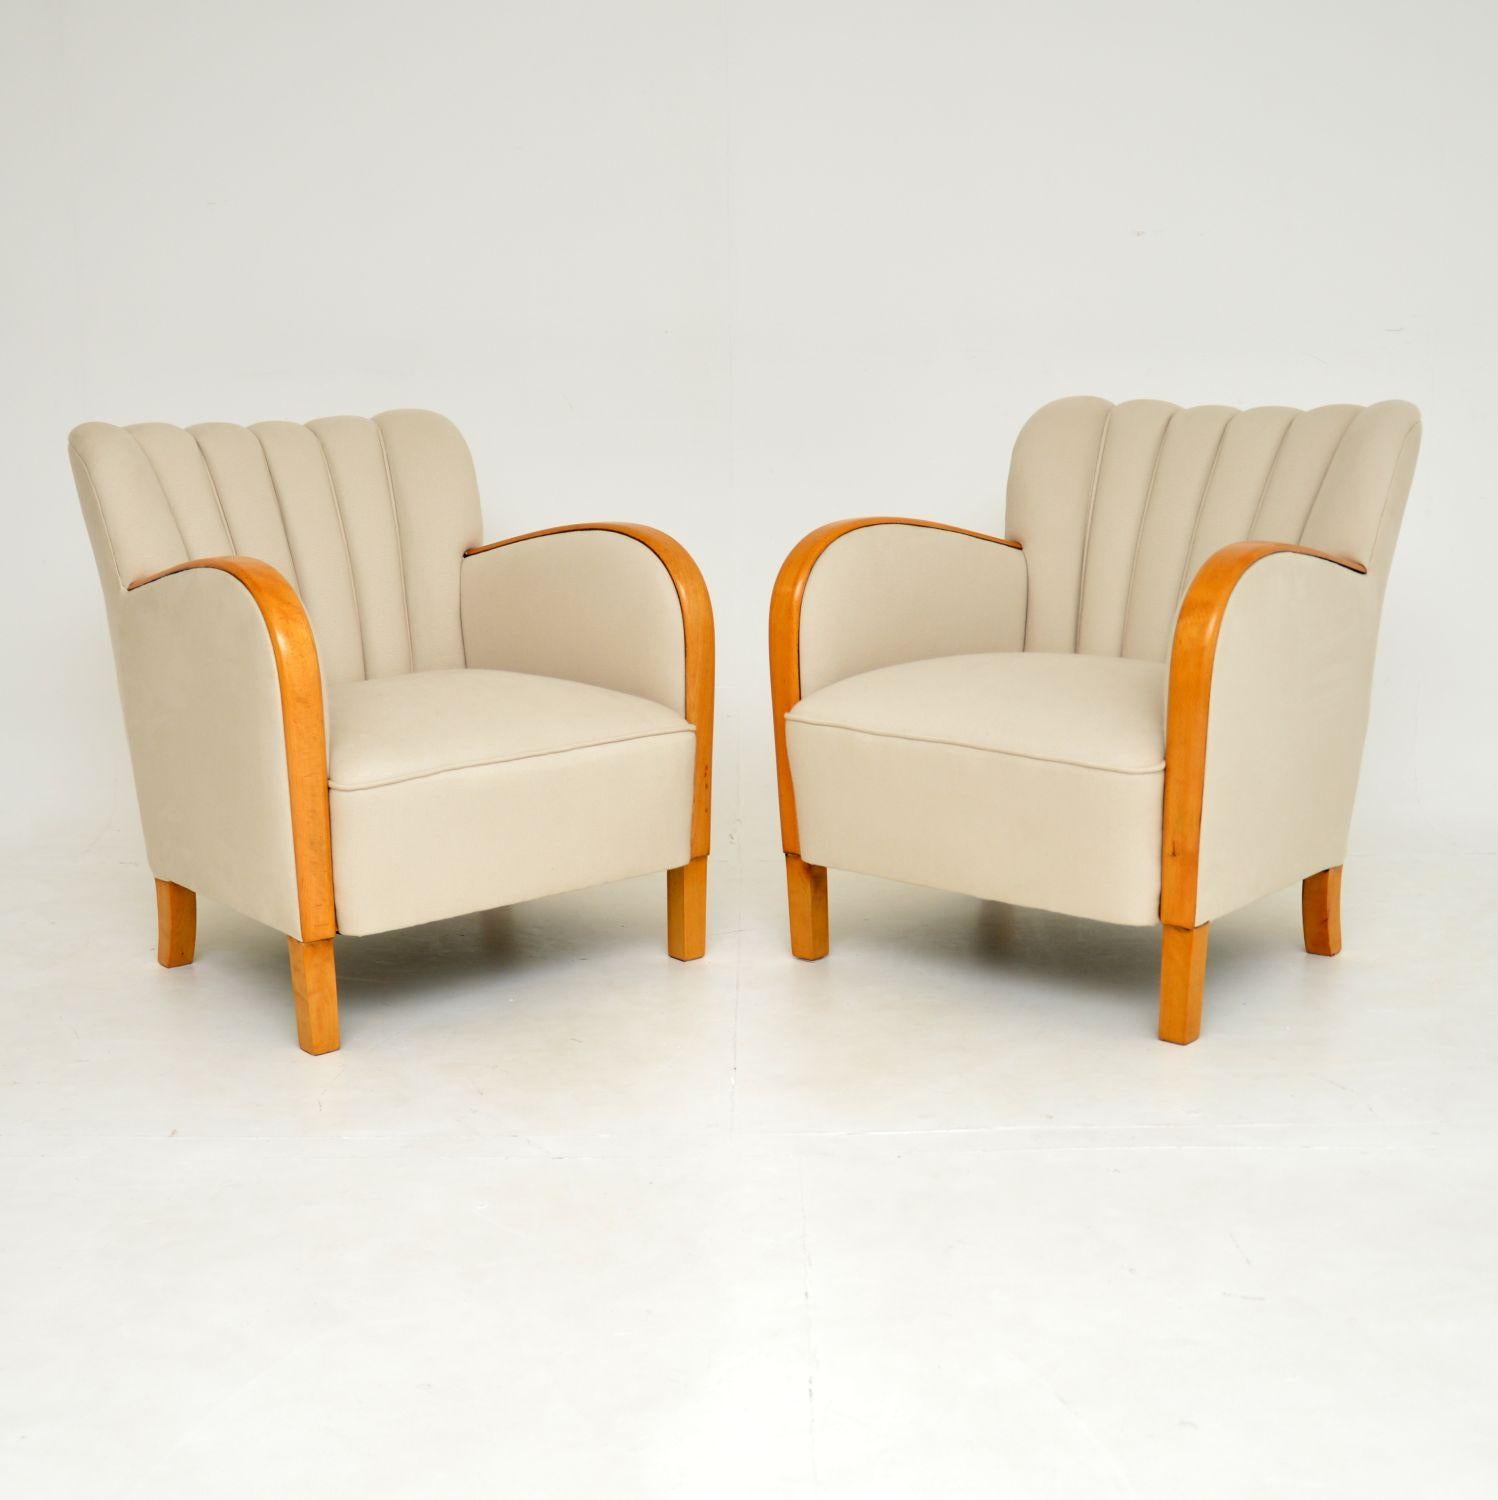 A very stylish pair of original Swedish Art Deco period armchairs, dating from the 1930’s period.

They are of superb quality and are very comfortable. They have wonderful scalloped backs and amazing satin birch on the arms and legs.

We have